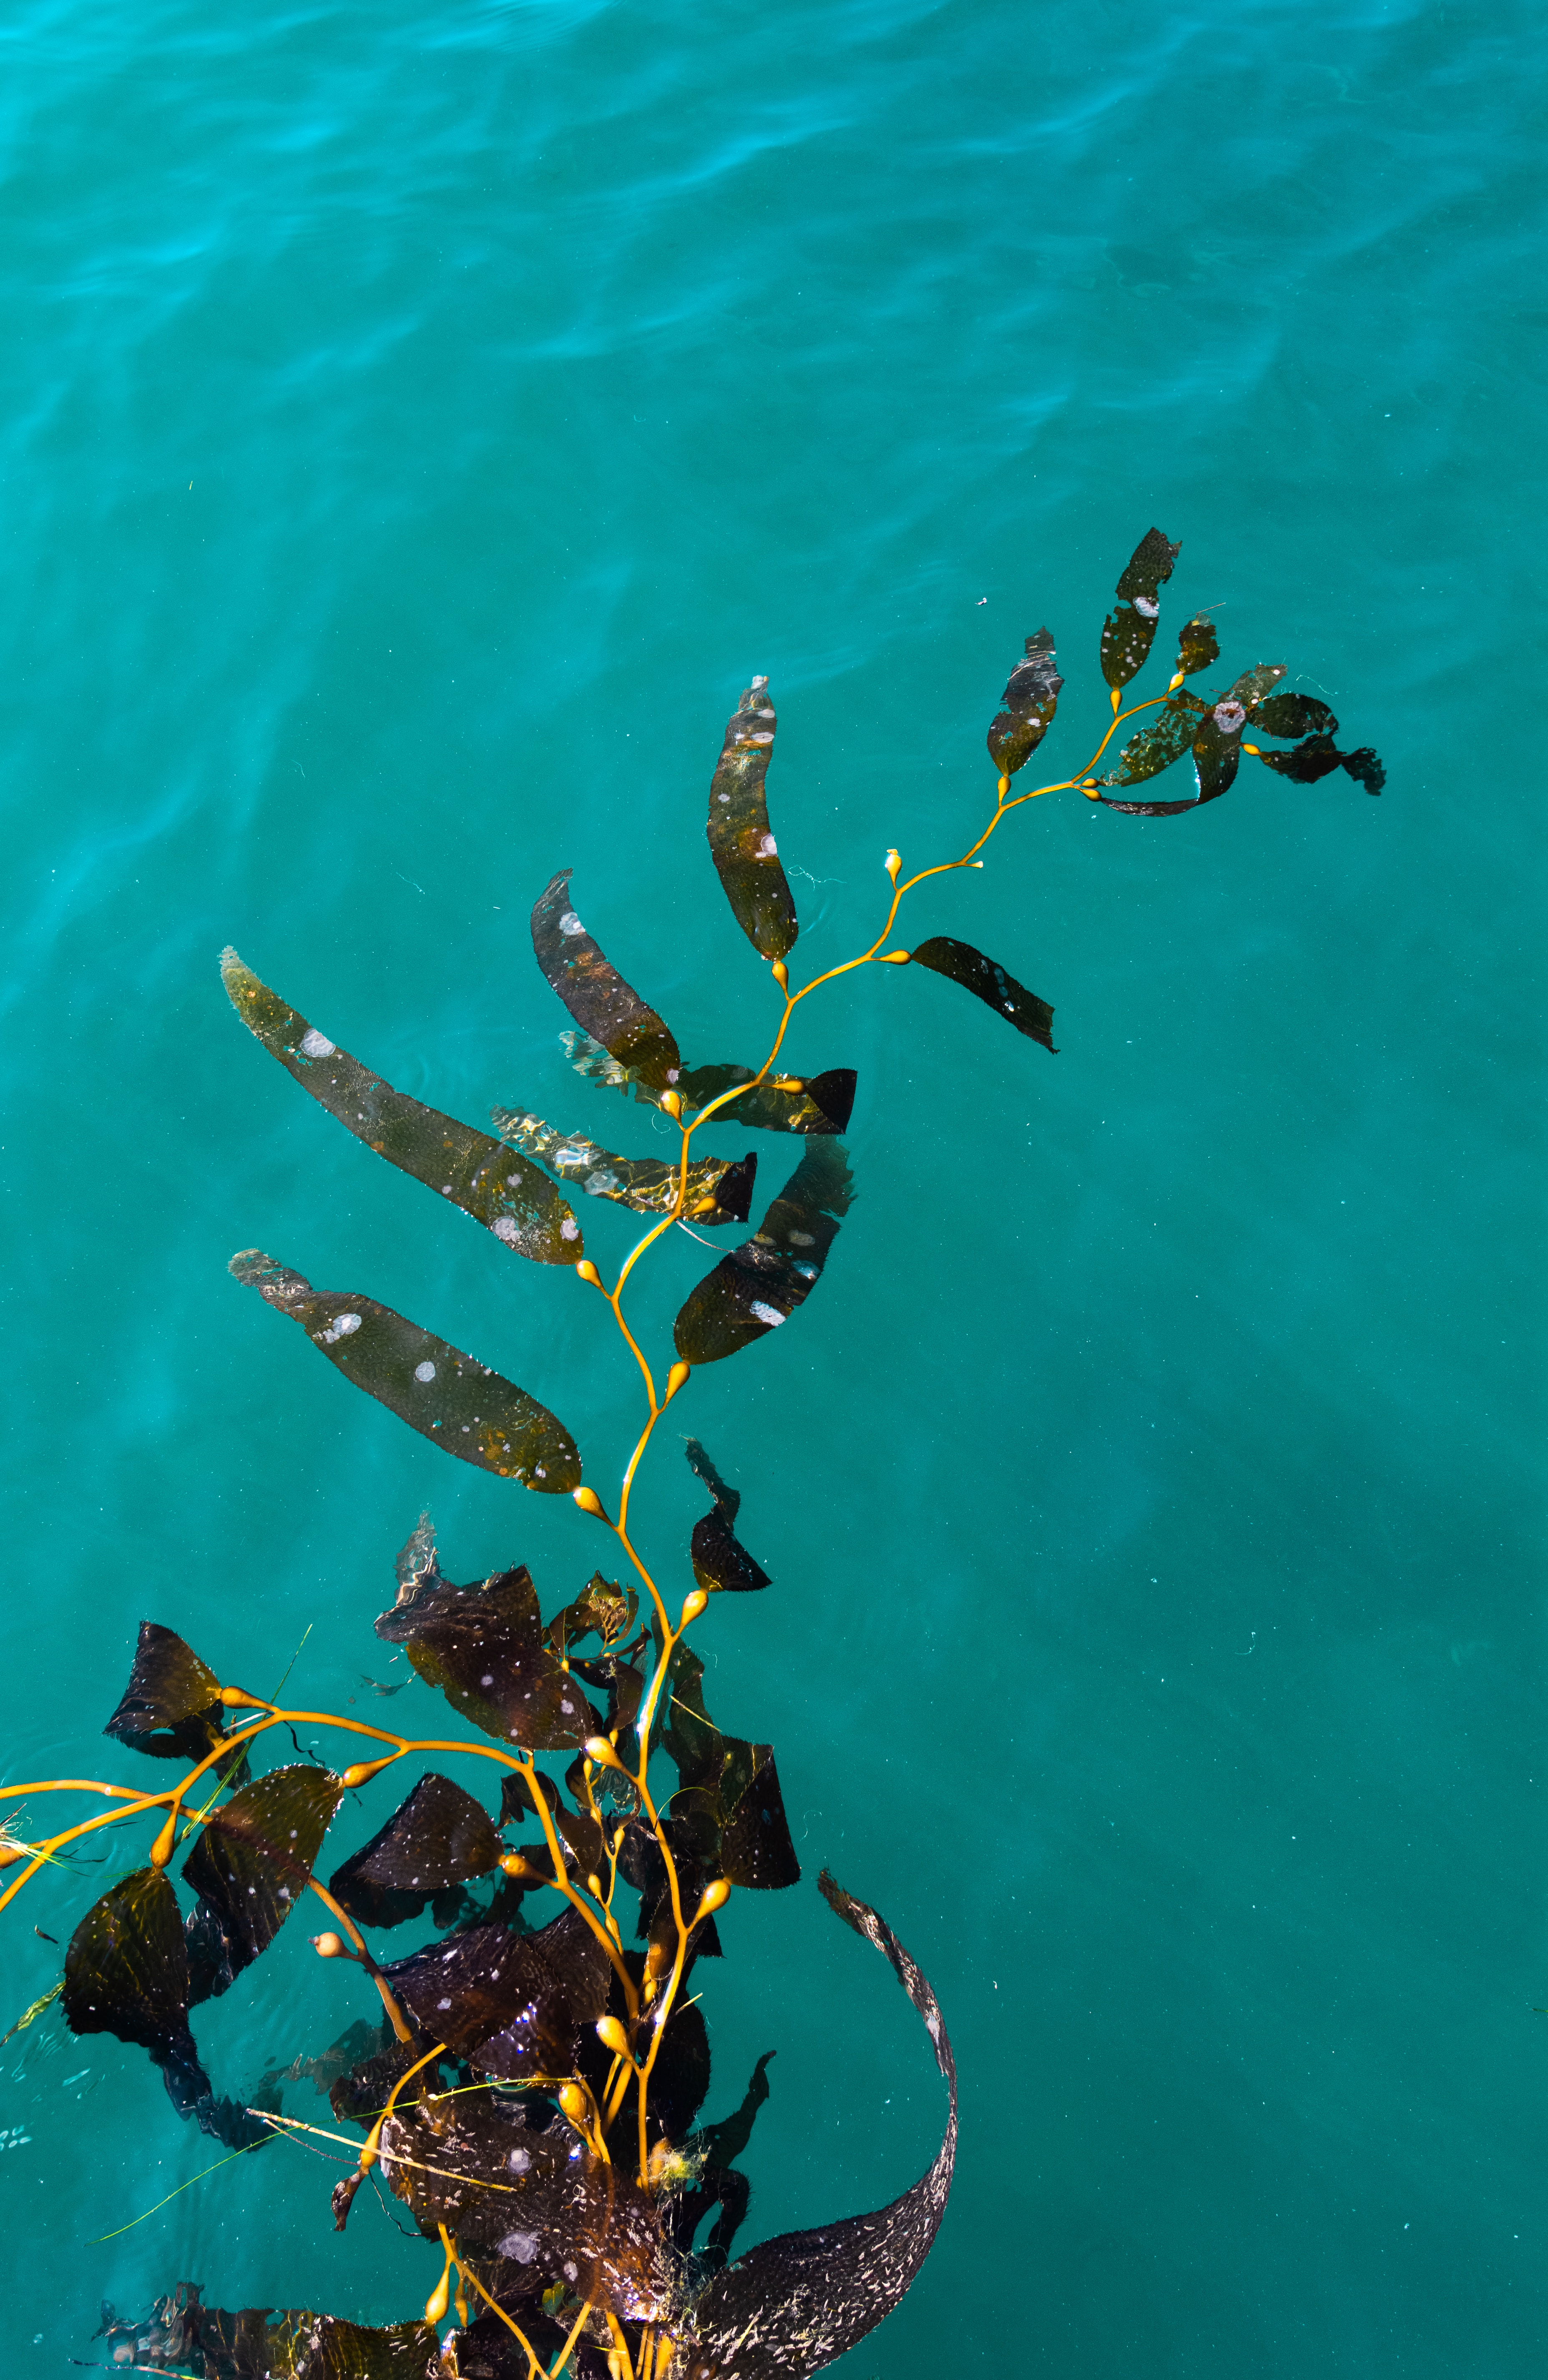 An image of kelp at the surface